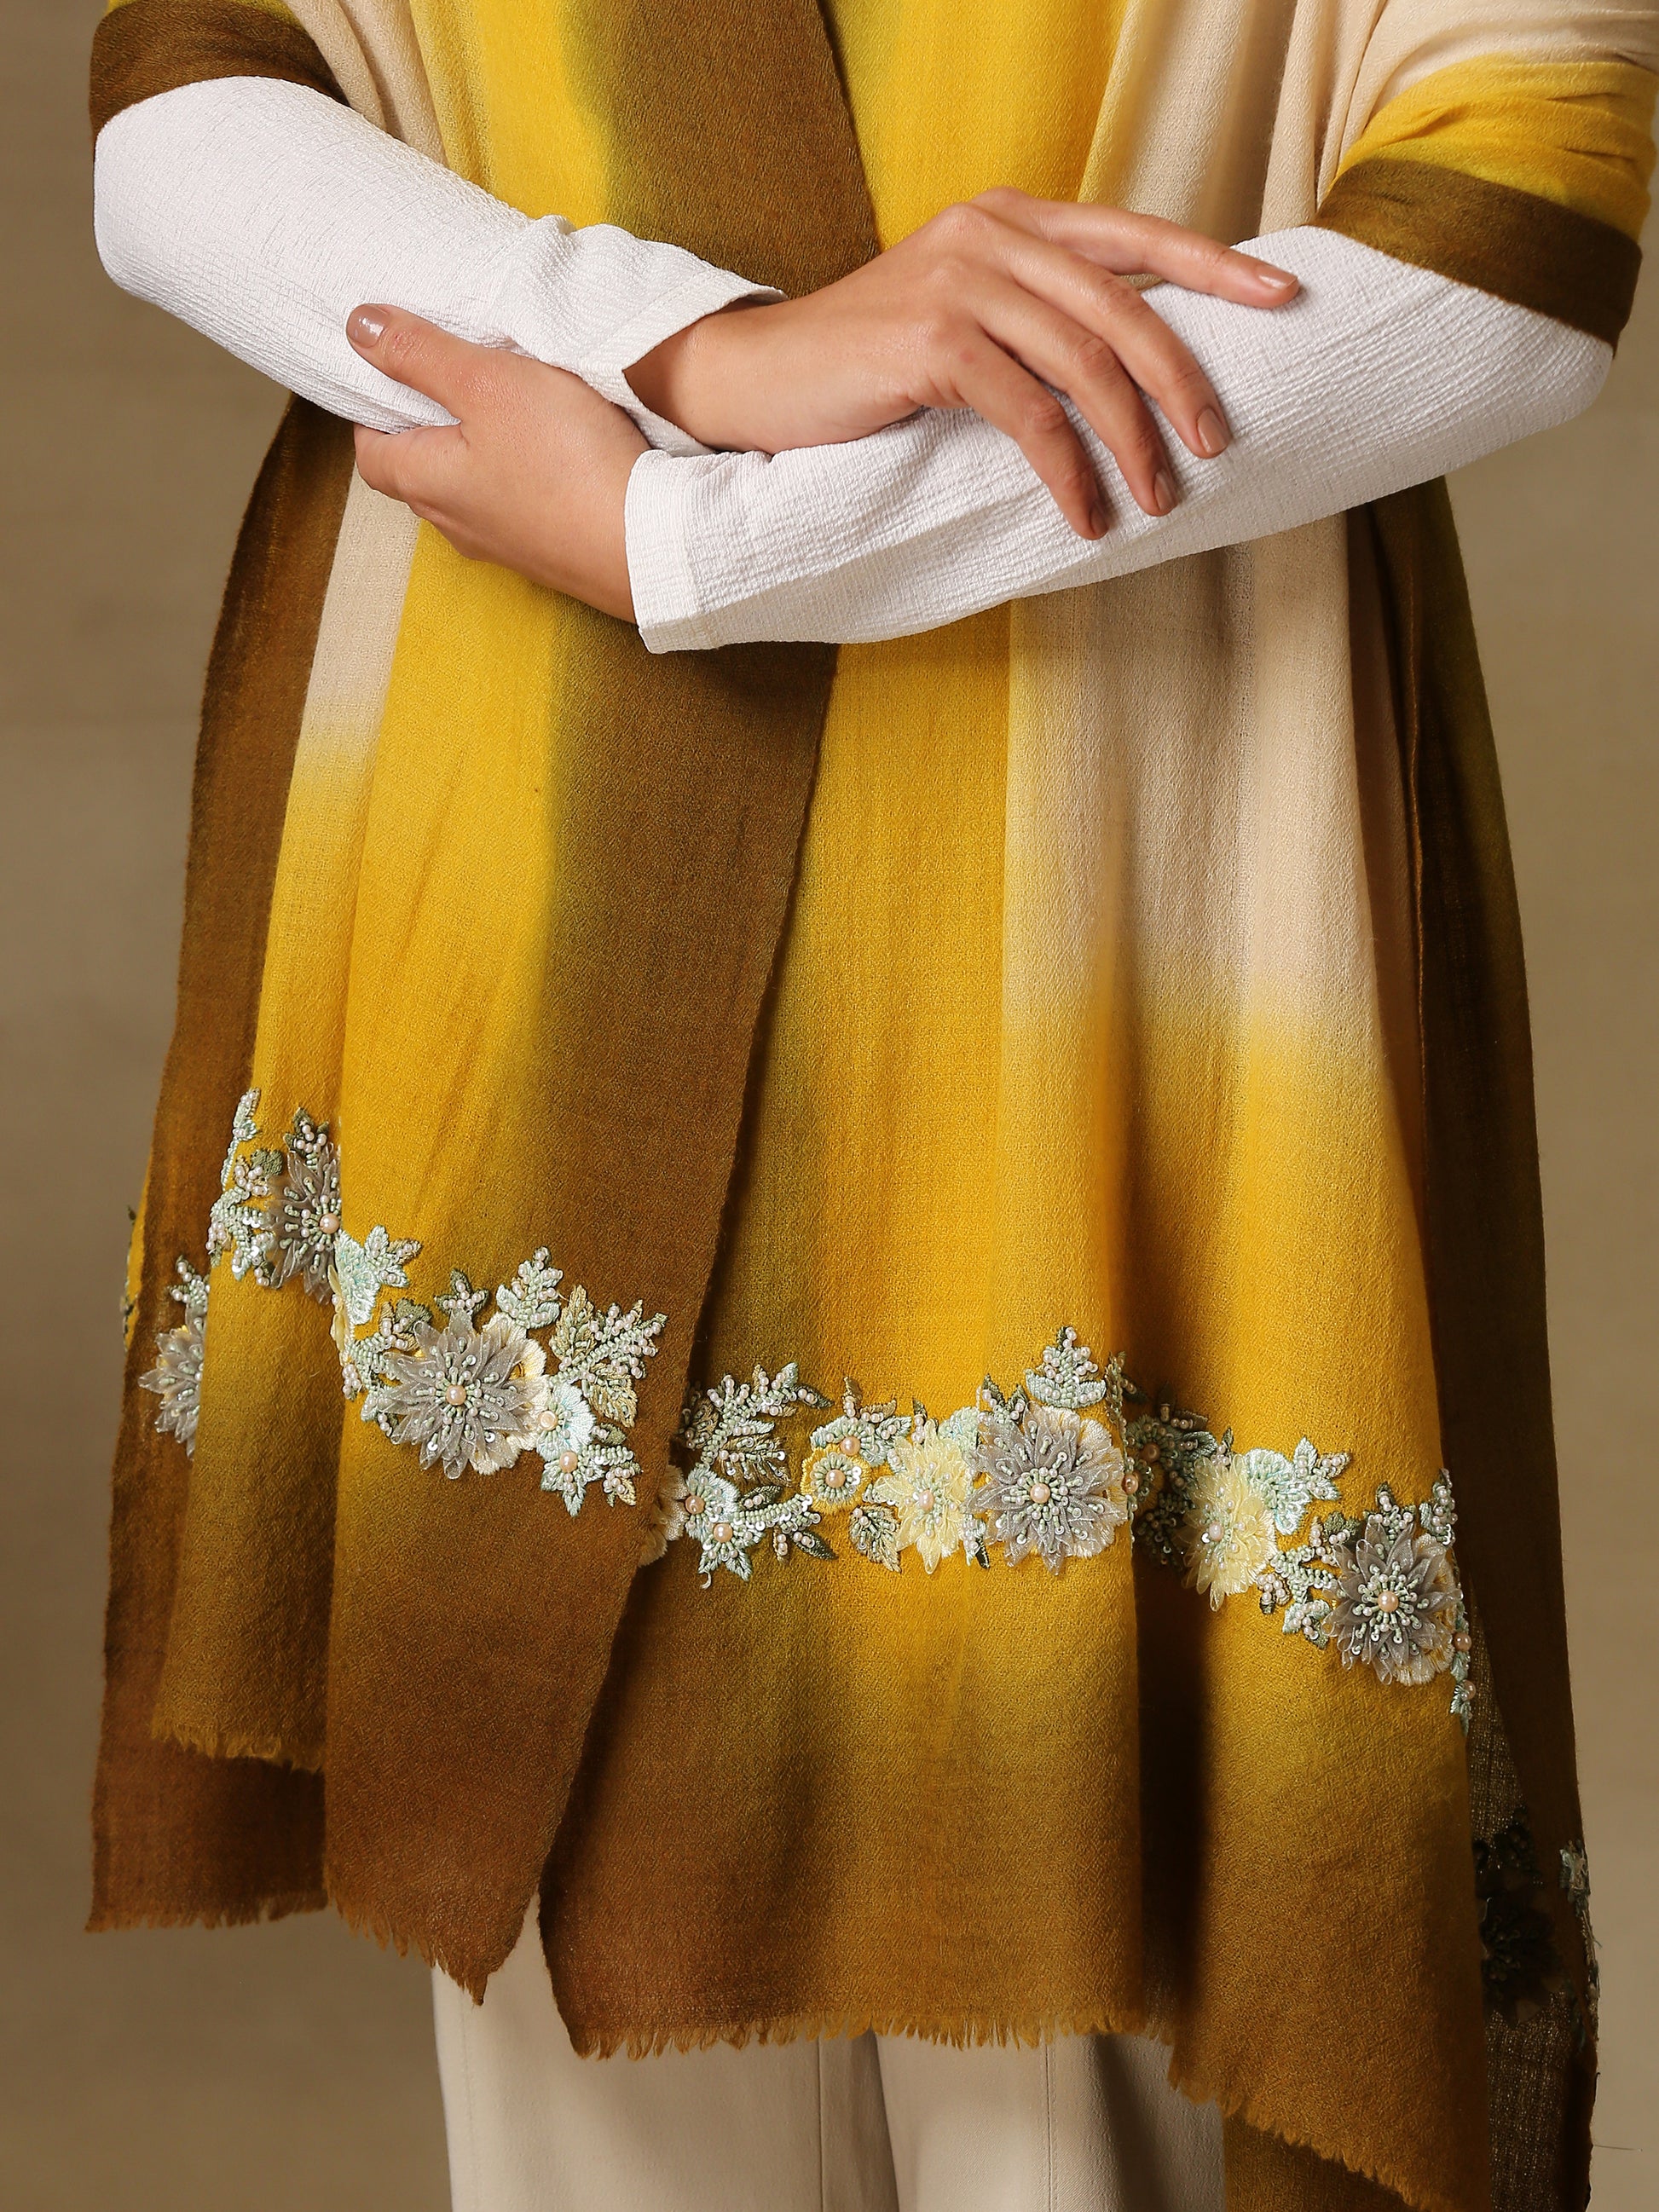 Model is wearing Enchanted pashmina stole from shaza in senescence featuring a hand painted ombre in ochre colours and delicate embroidery consisting of pearls, shellwork and cutdana. 